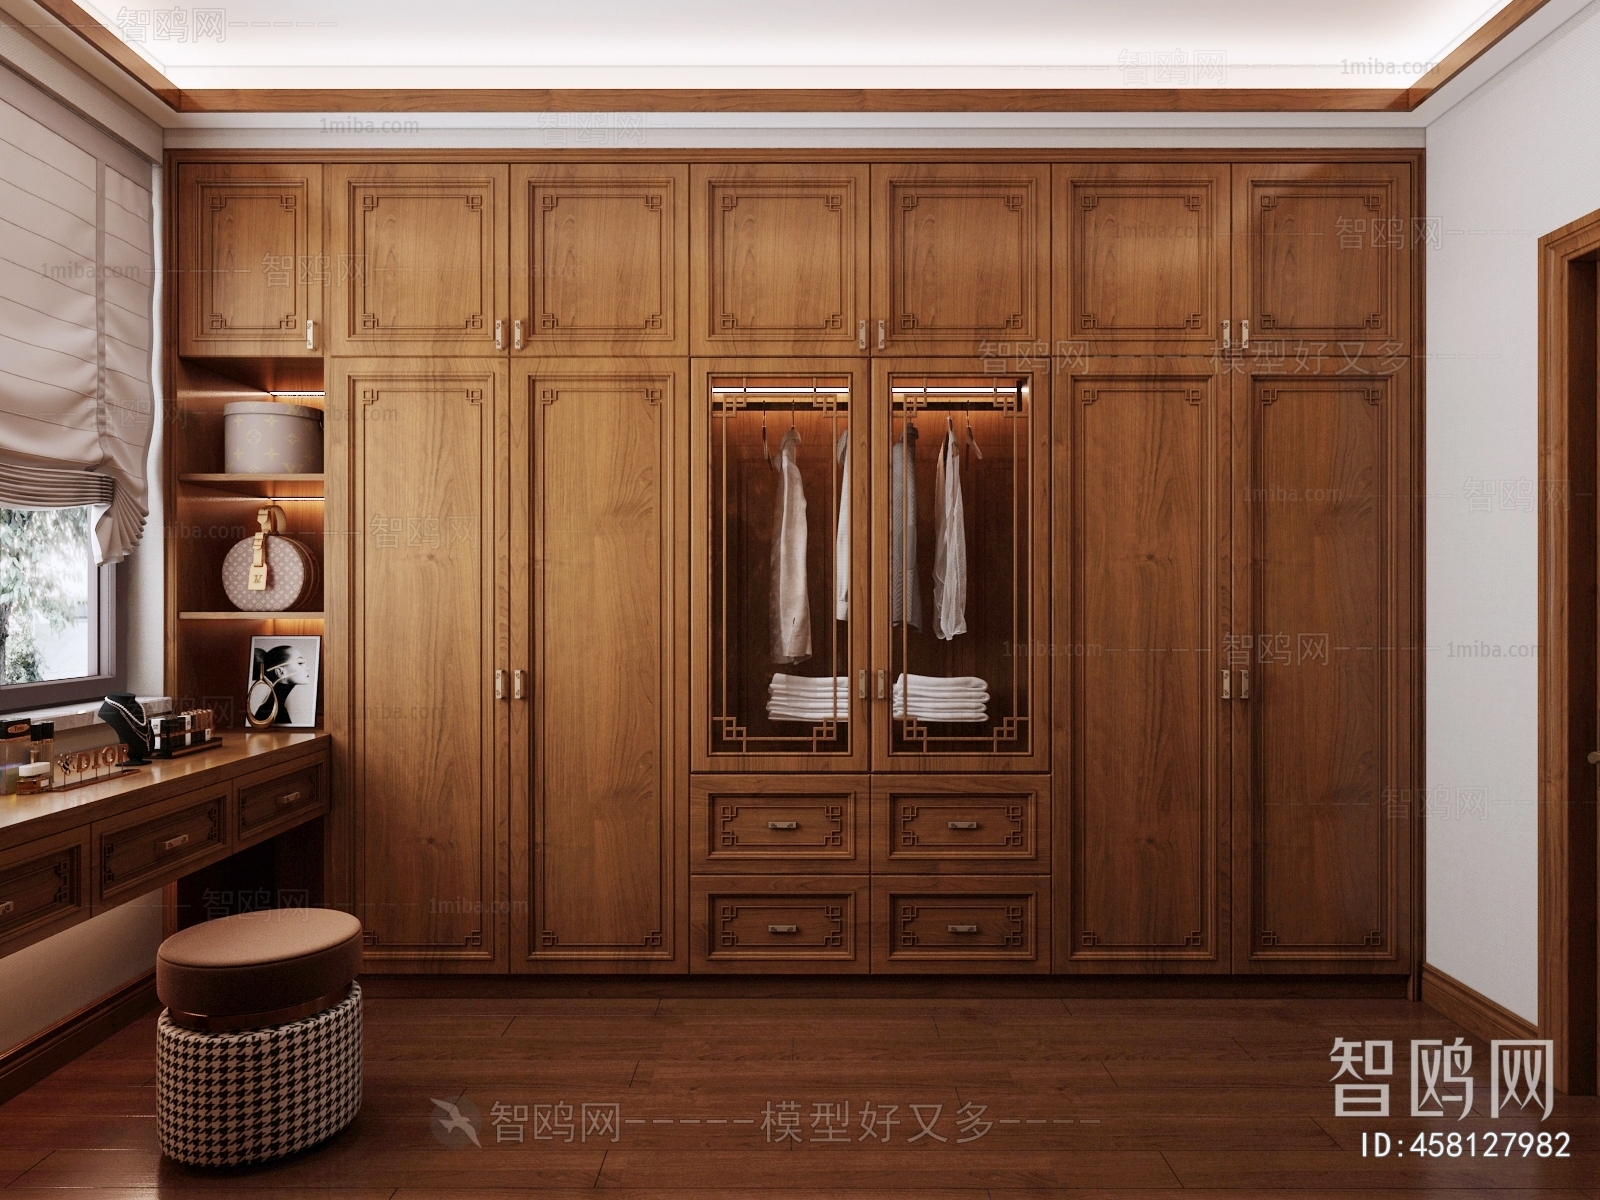 Chinese Style Clothes Storage Area